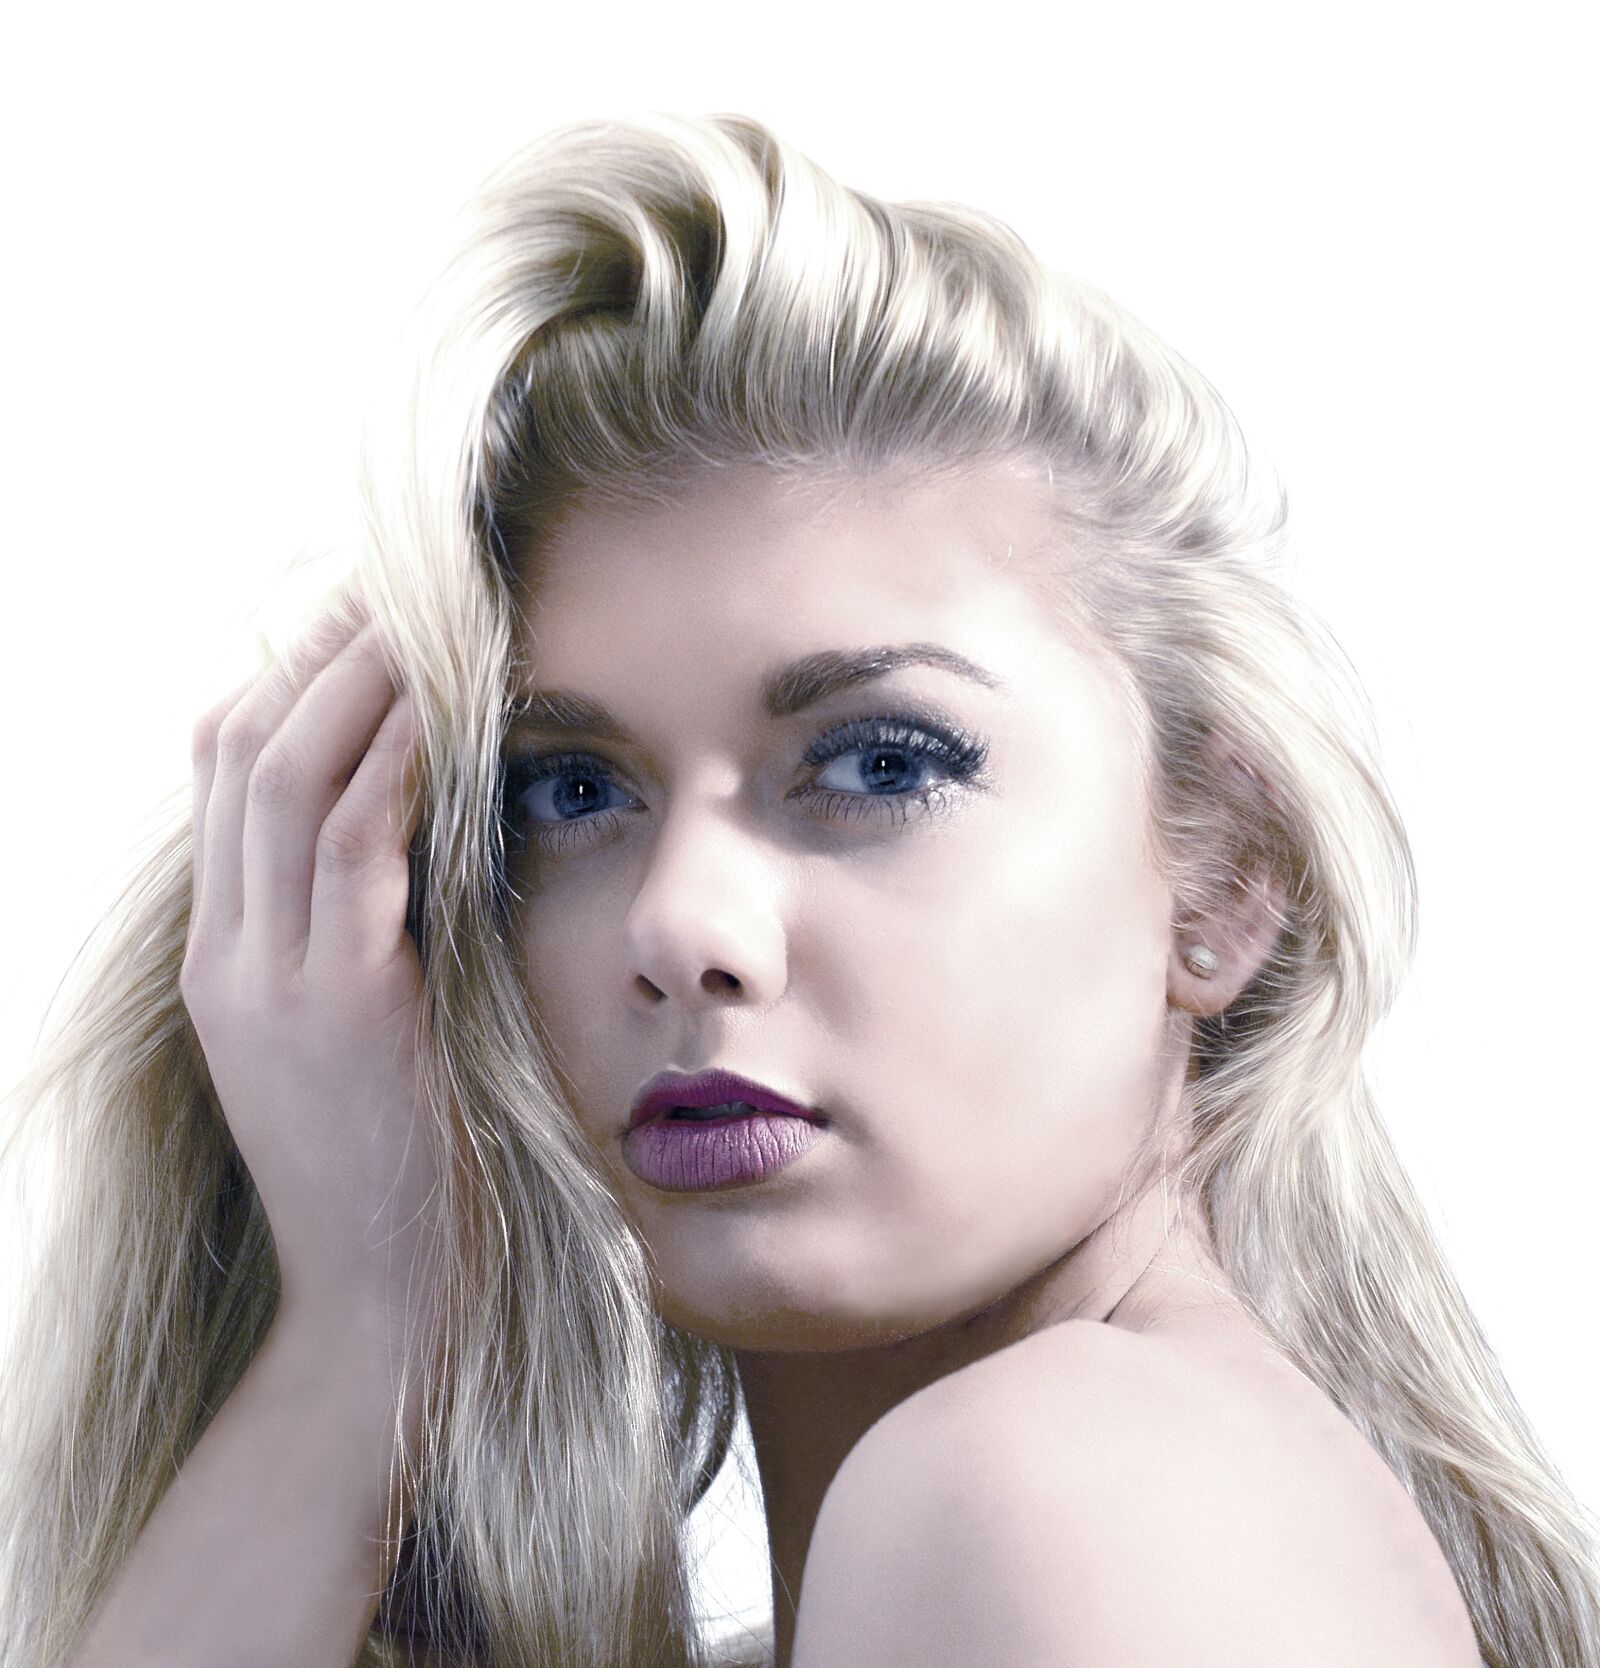 Nikon D800 sample photo. Blonde bombshell, desaturated, iconic photography